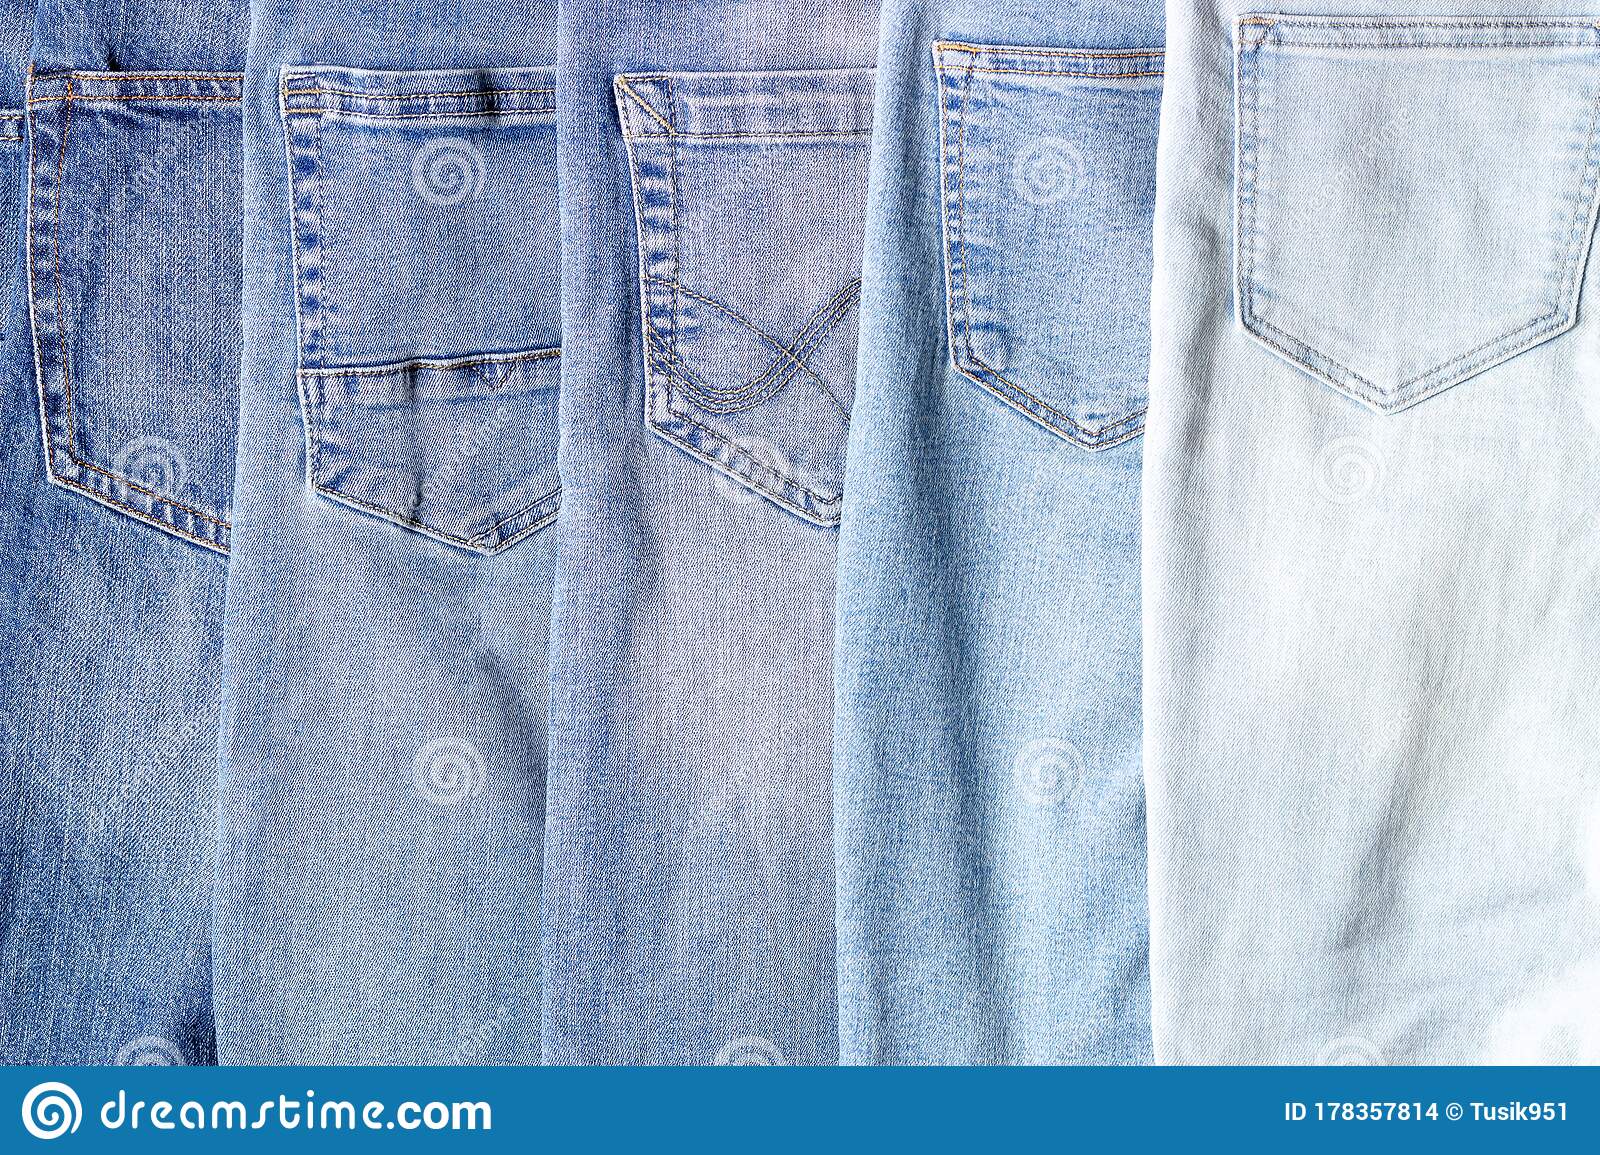 Why You Should Have Many Different Types Of Jeans - Your Fashion Guru